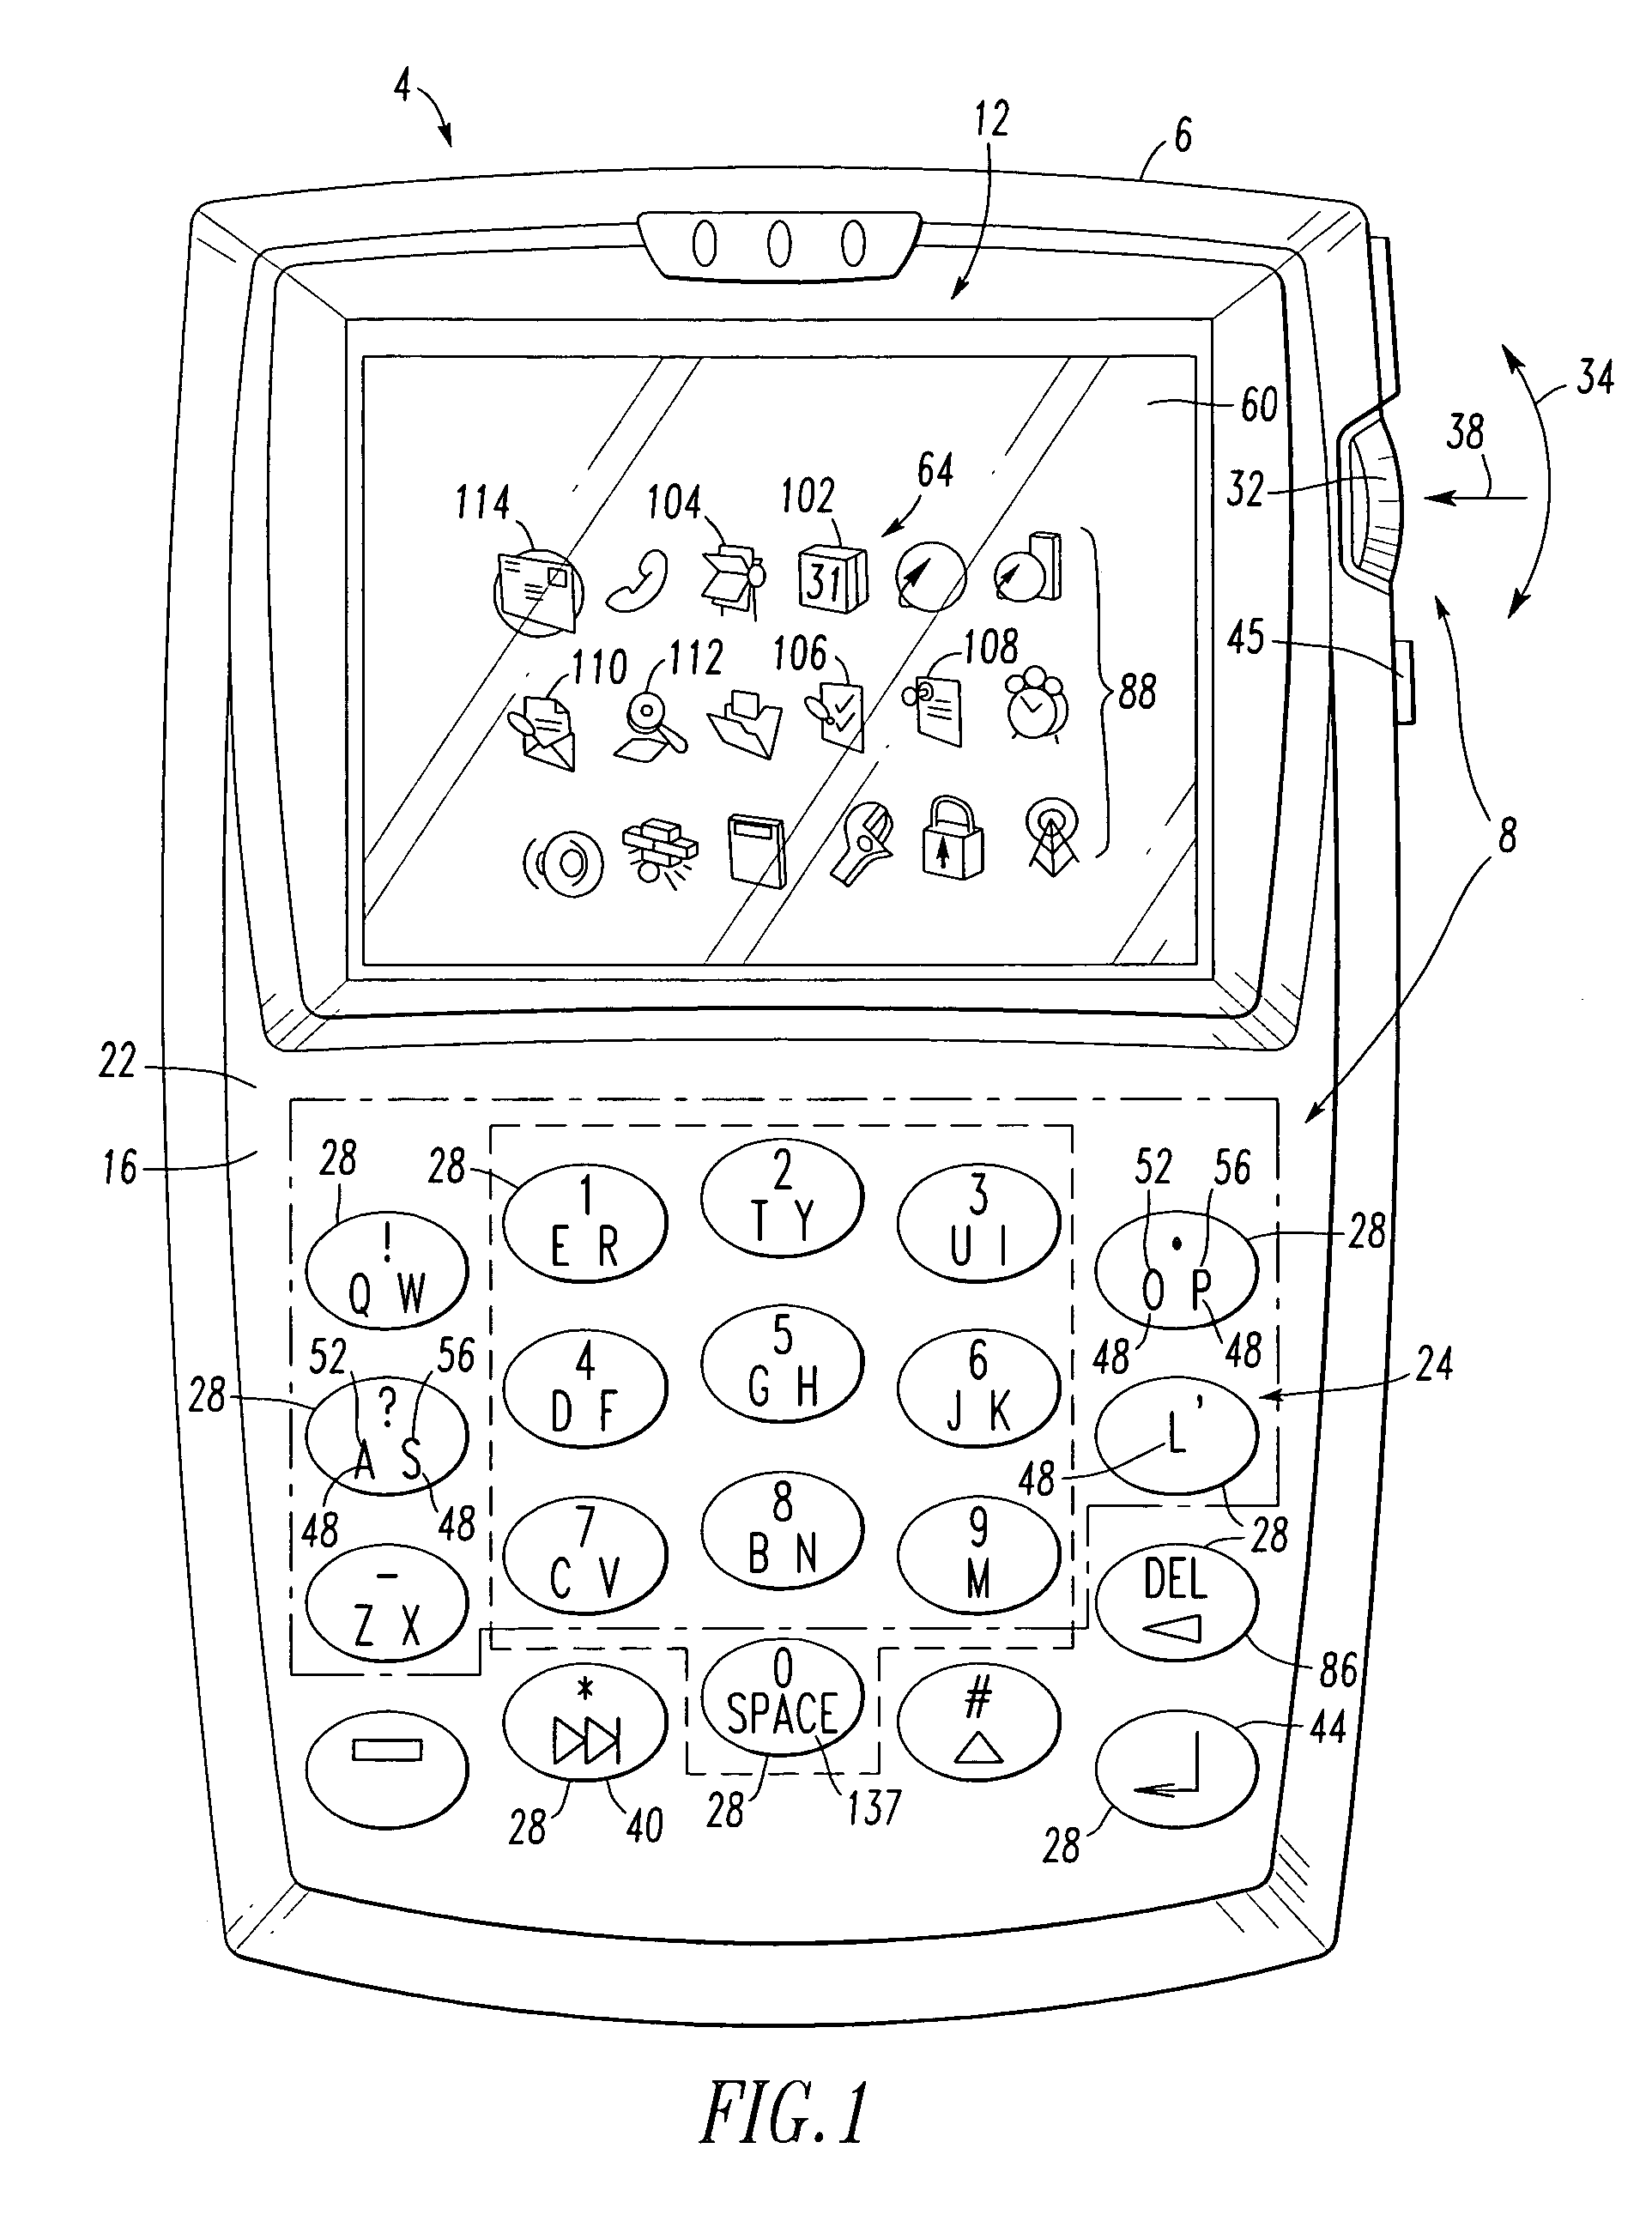 Method of searching for personal information management (PIM) information and handheld electronic device employing the same